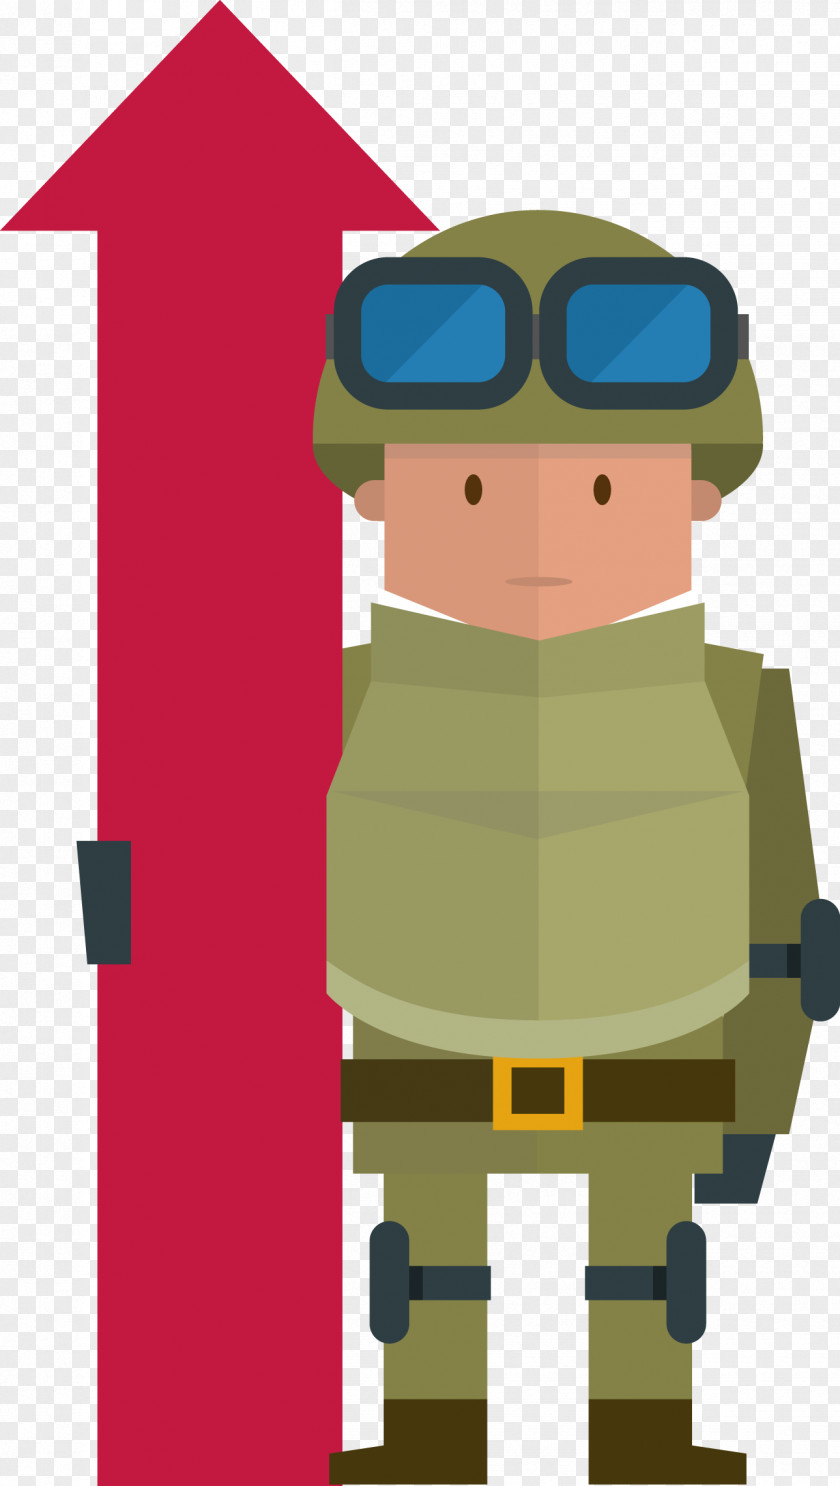 Union Cartoon Soldier Army Vector Graphics Military PNG